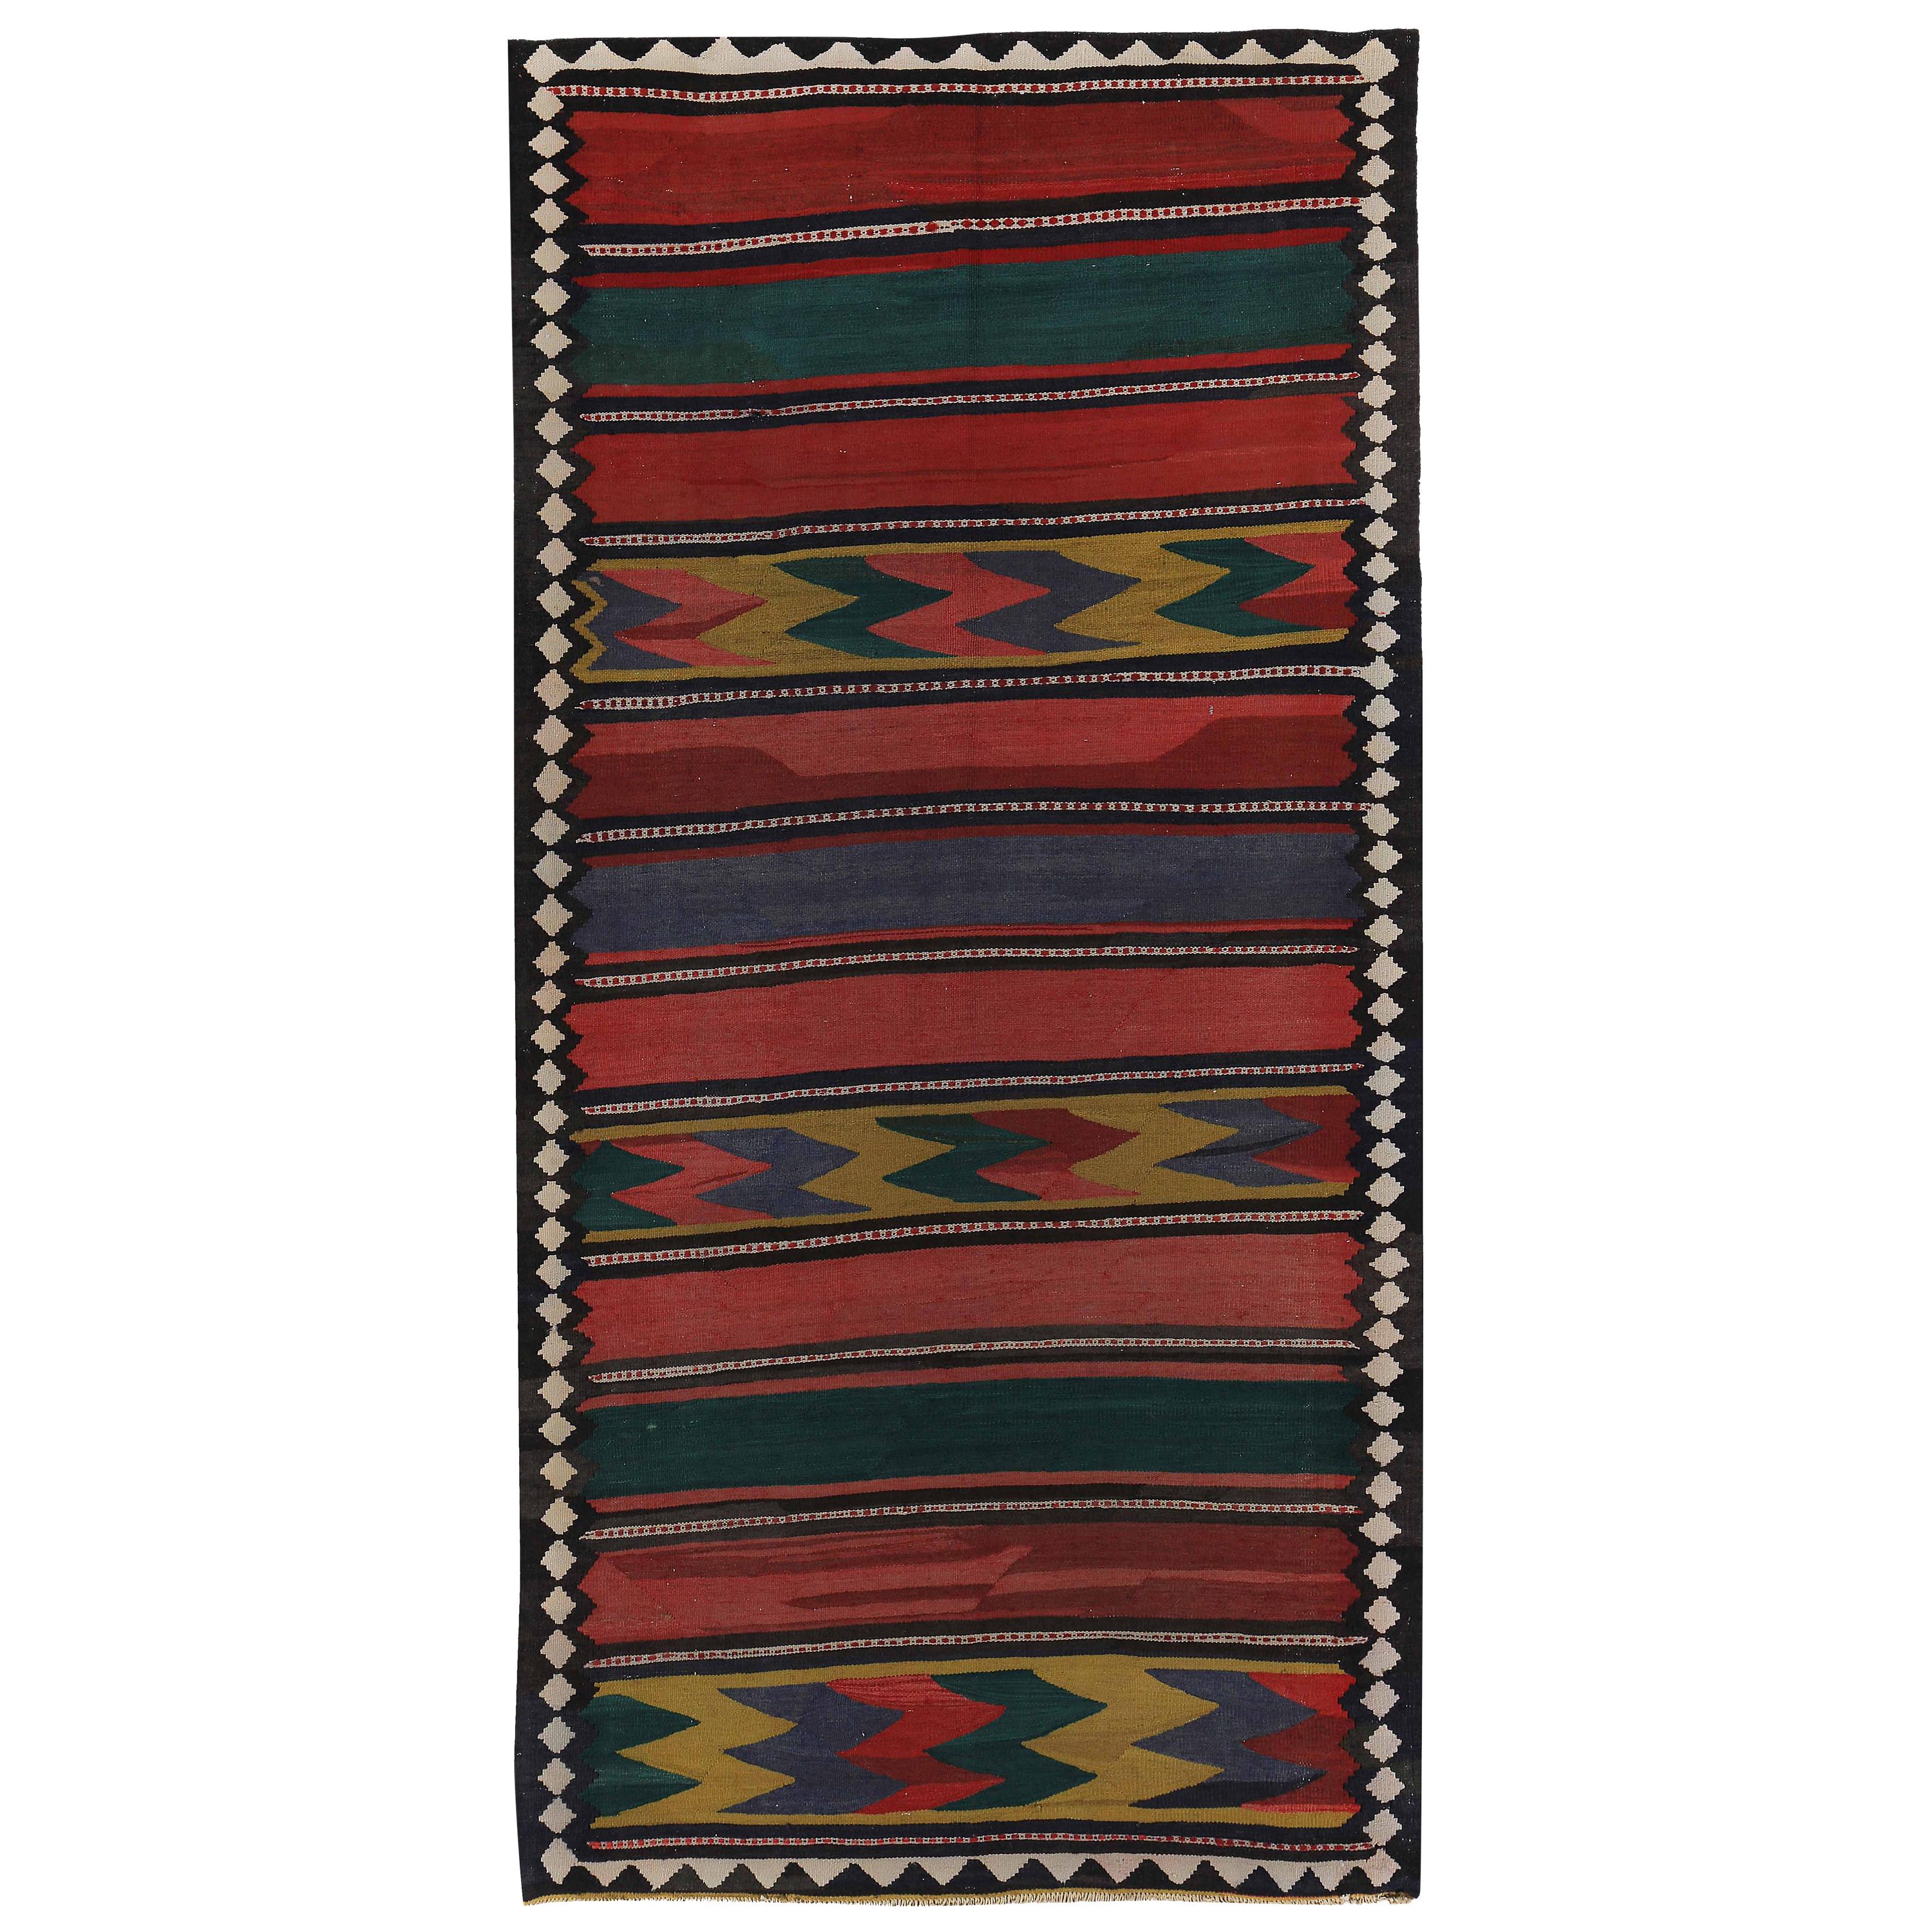 Modern Turkish Kilim Runner Rug with Red and Green Tribal Patterns For Sale